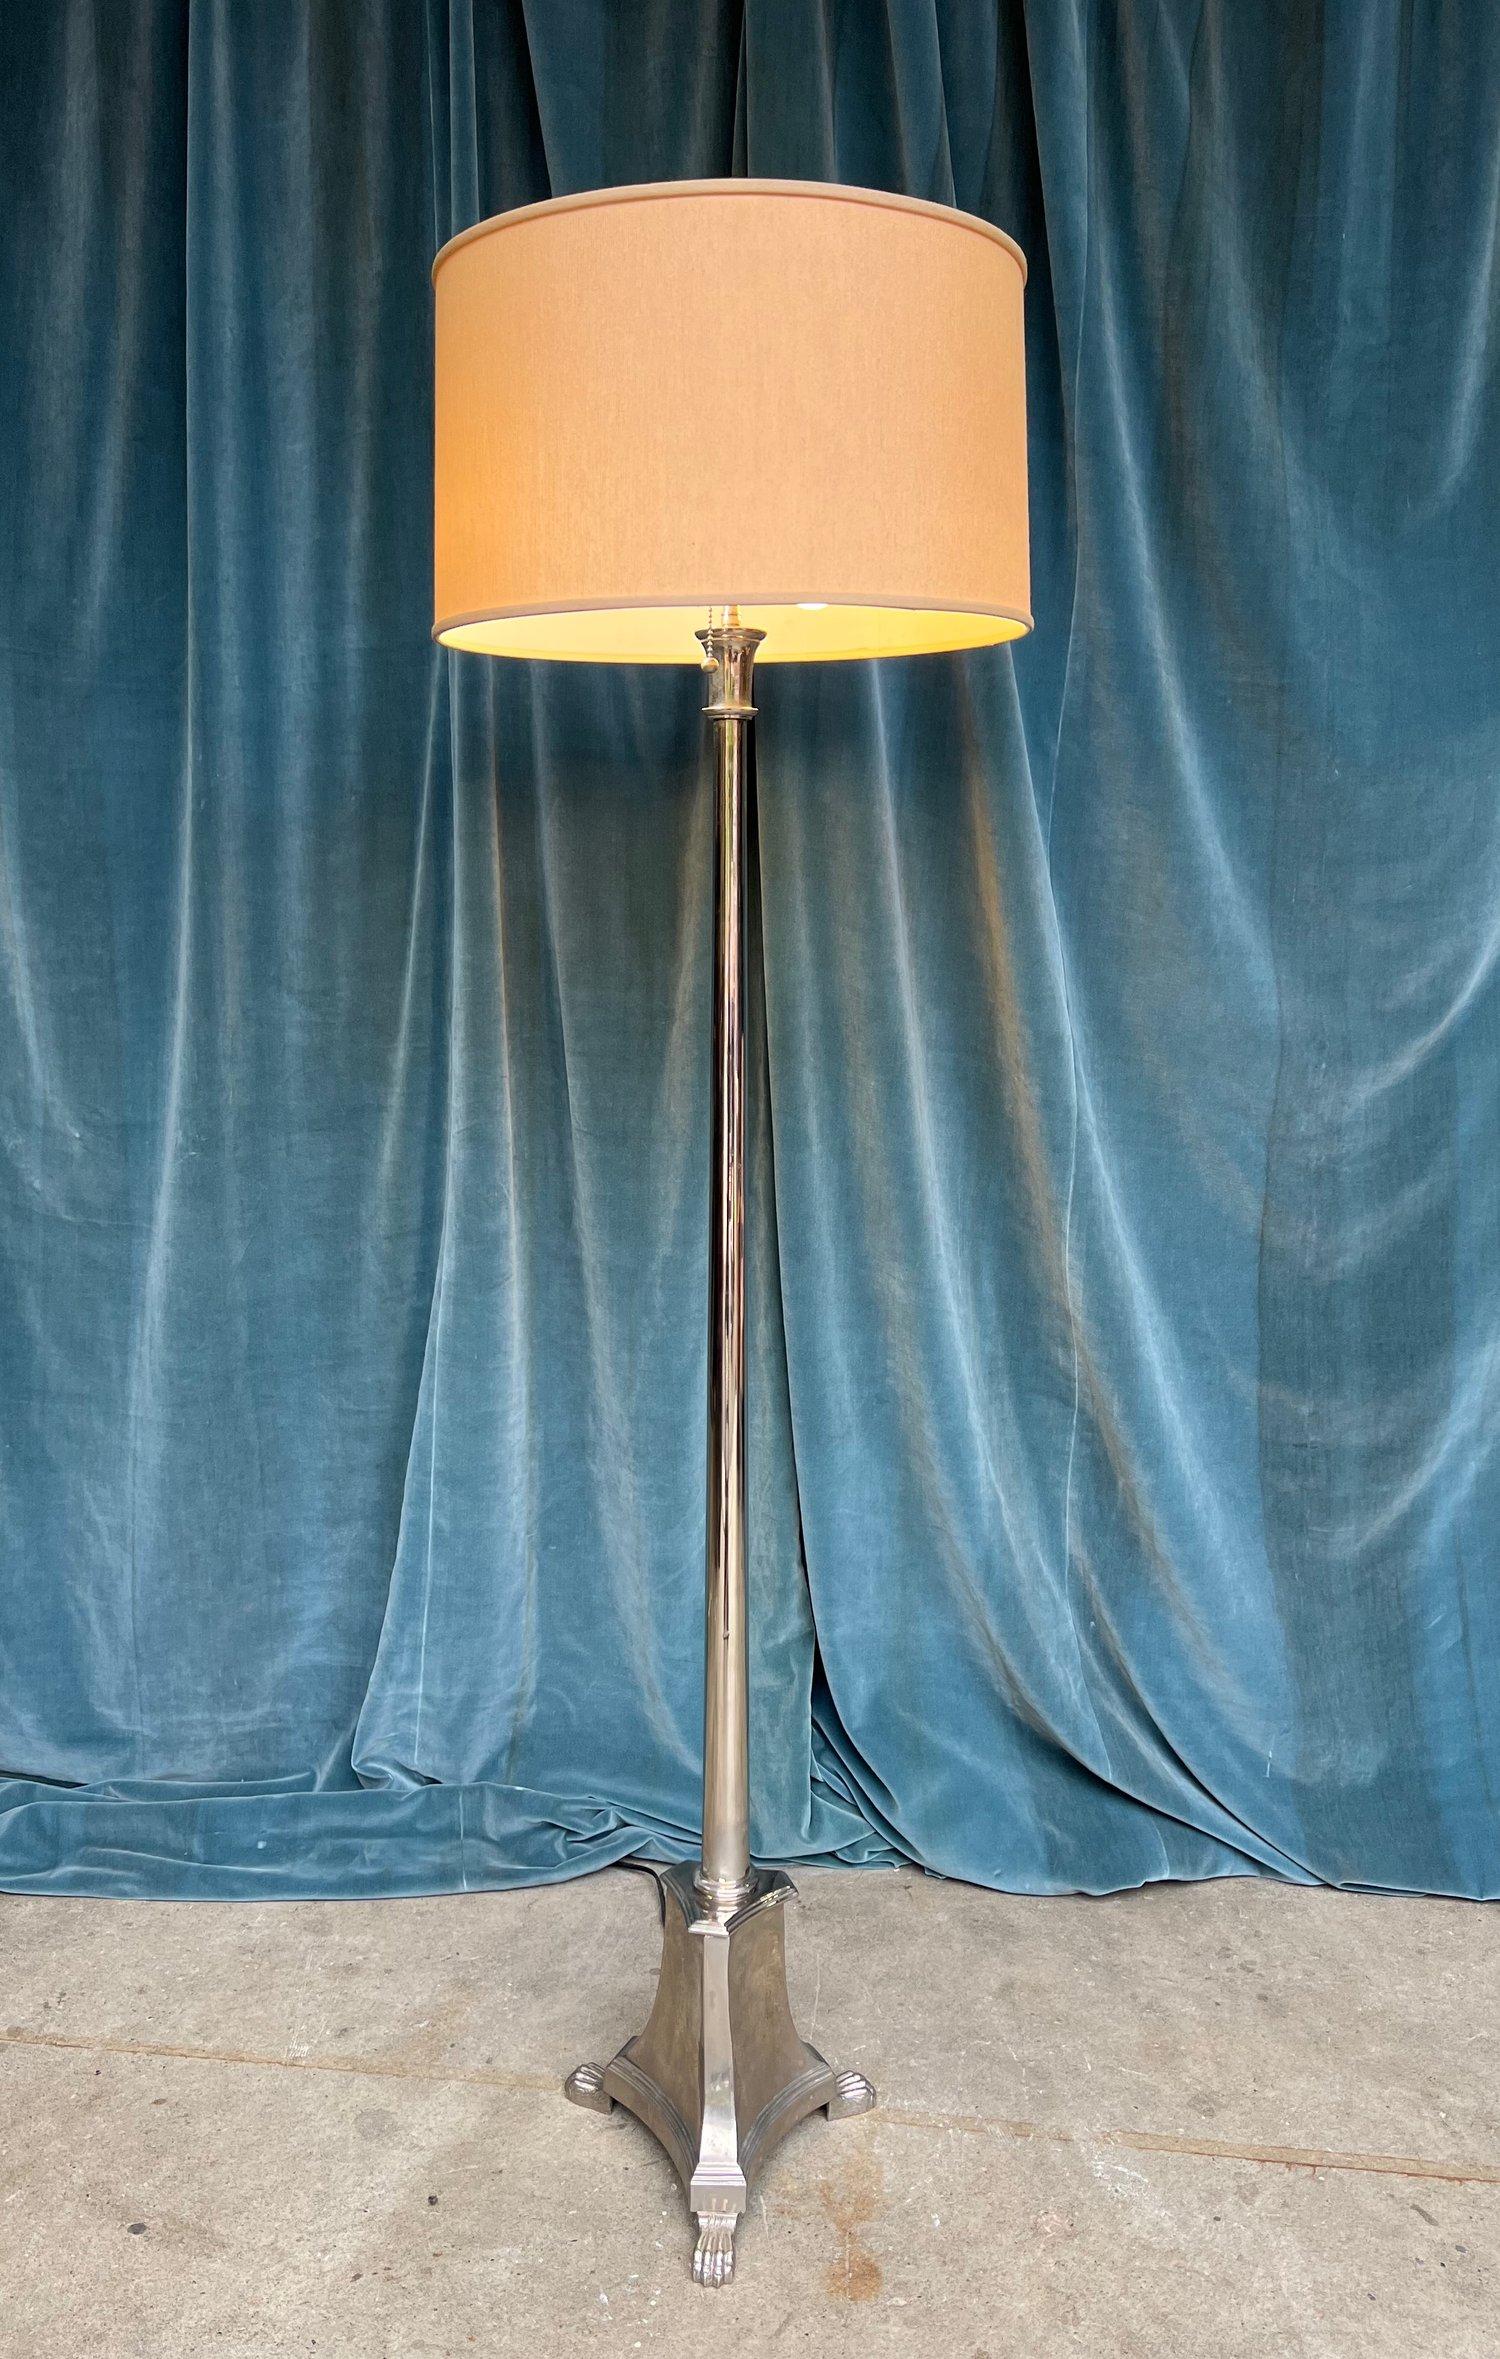 A French 1940s Neoclassical style floor lamp in a polished nickel finish ready to illuminate your space with style and grace. It features a footed triangular base that not only provides stability but also adds an element of elegance. The gracefully